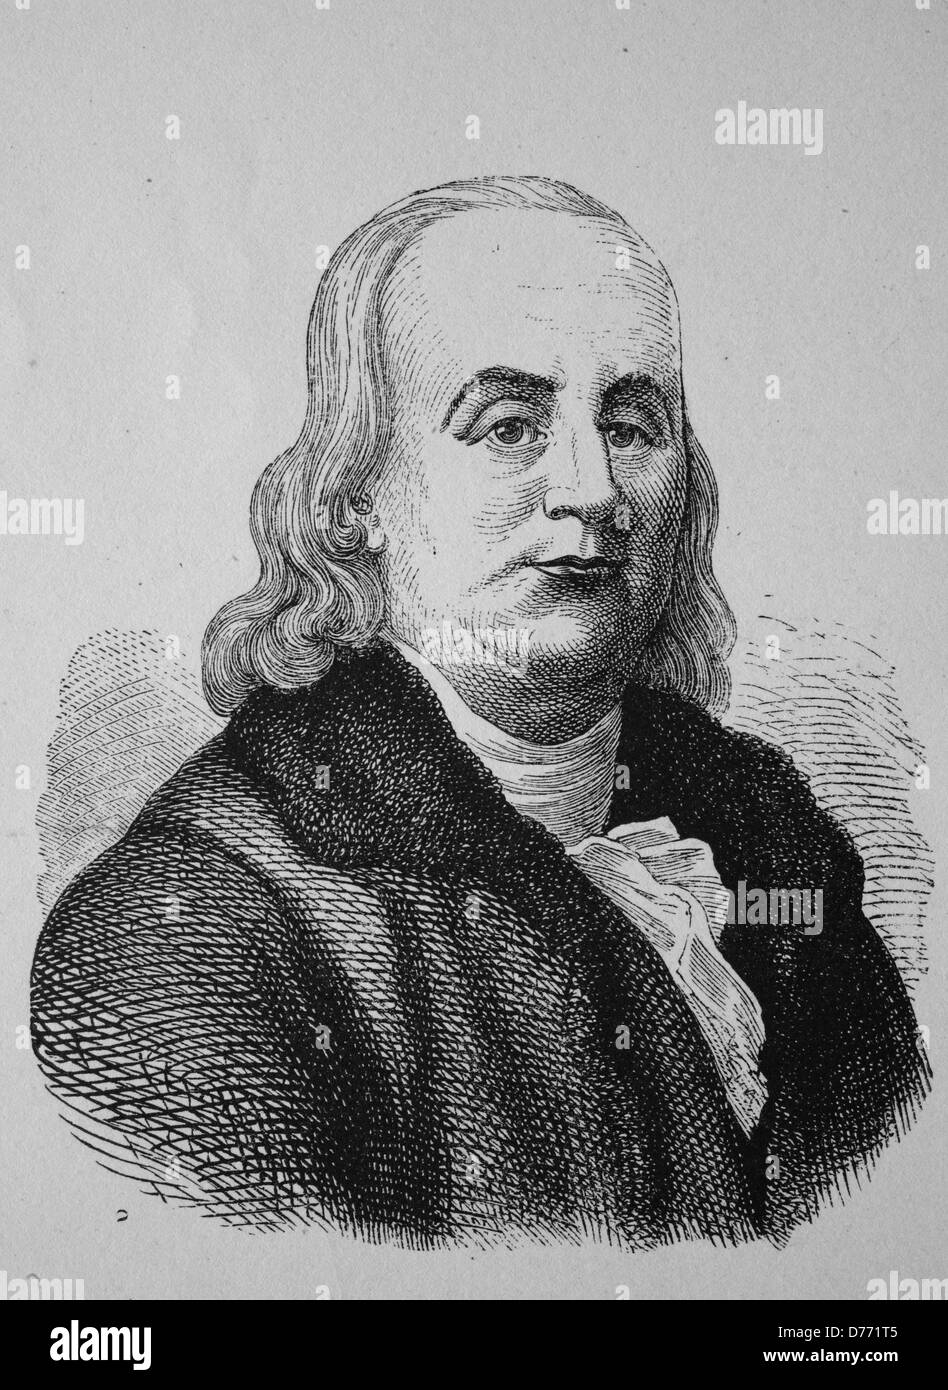 Benjamin Franklin, 1706 - 1790, one of the founders of the United States of America, the inventor of the lightning rod, historic Stock Photo